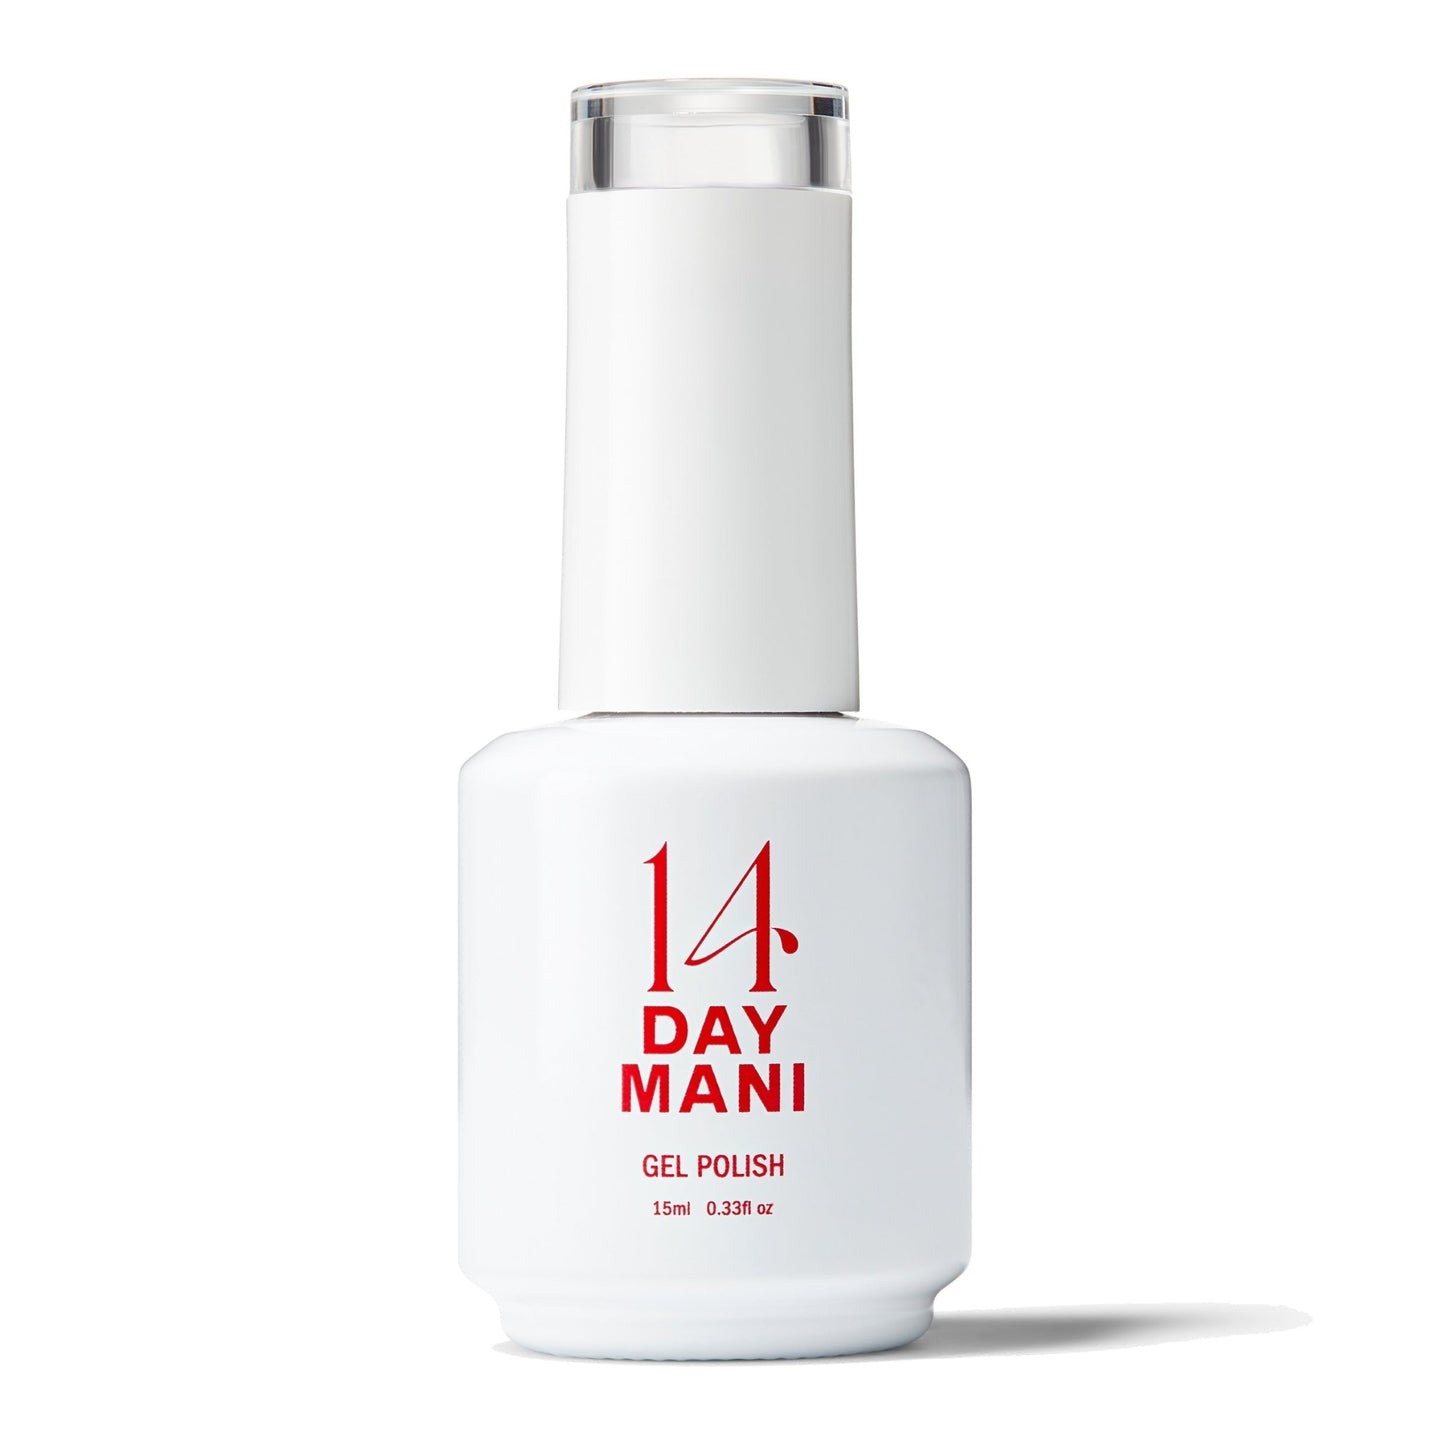 Live The Moment - Gel Polish - 14 Day Manicure - Bottle 